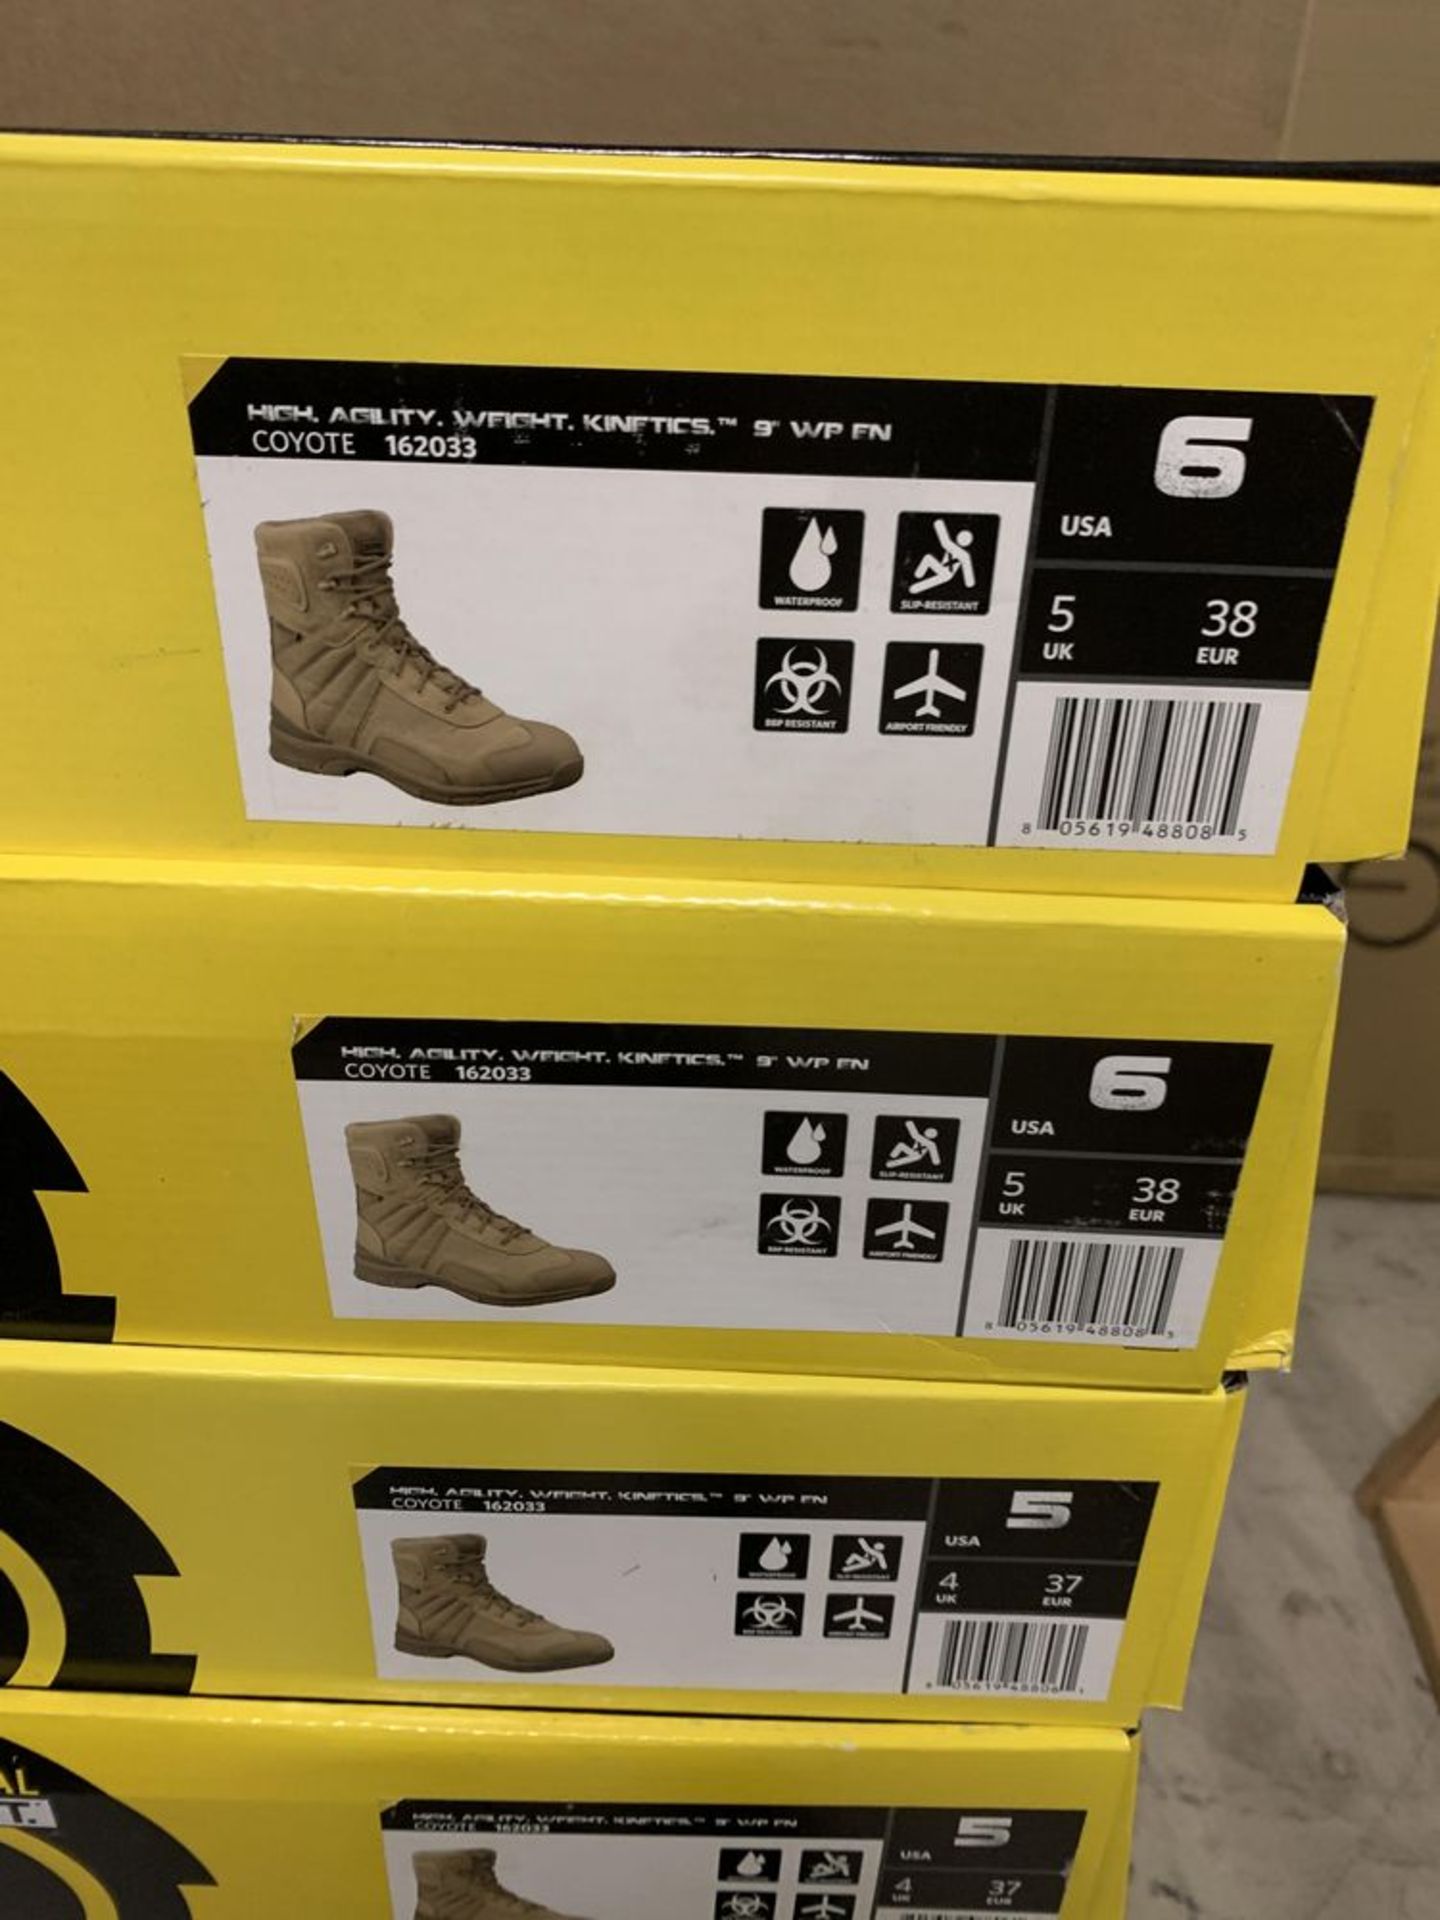 22 Pairs of Original SWAT Tactical Boots, Coyote 162033,Tan, High Agility Weight, 9", Various - Image 5 of 5